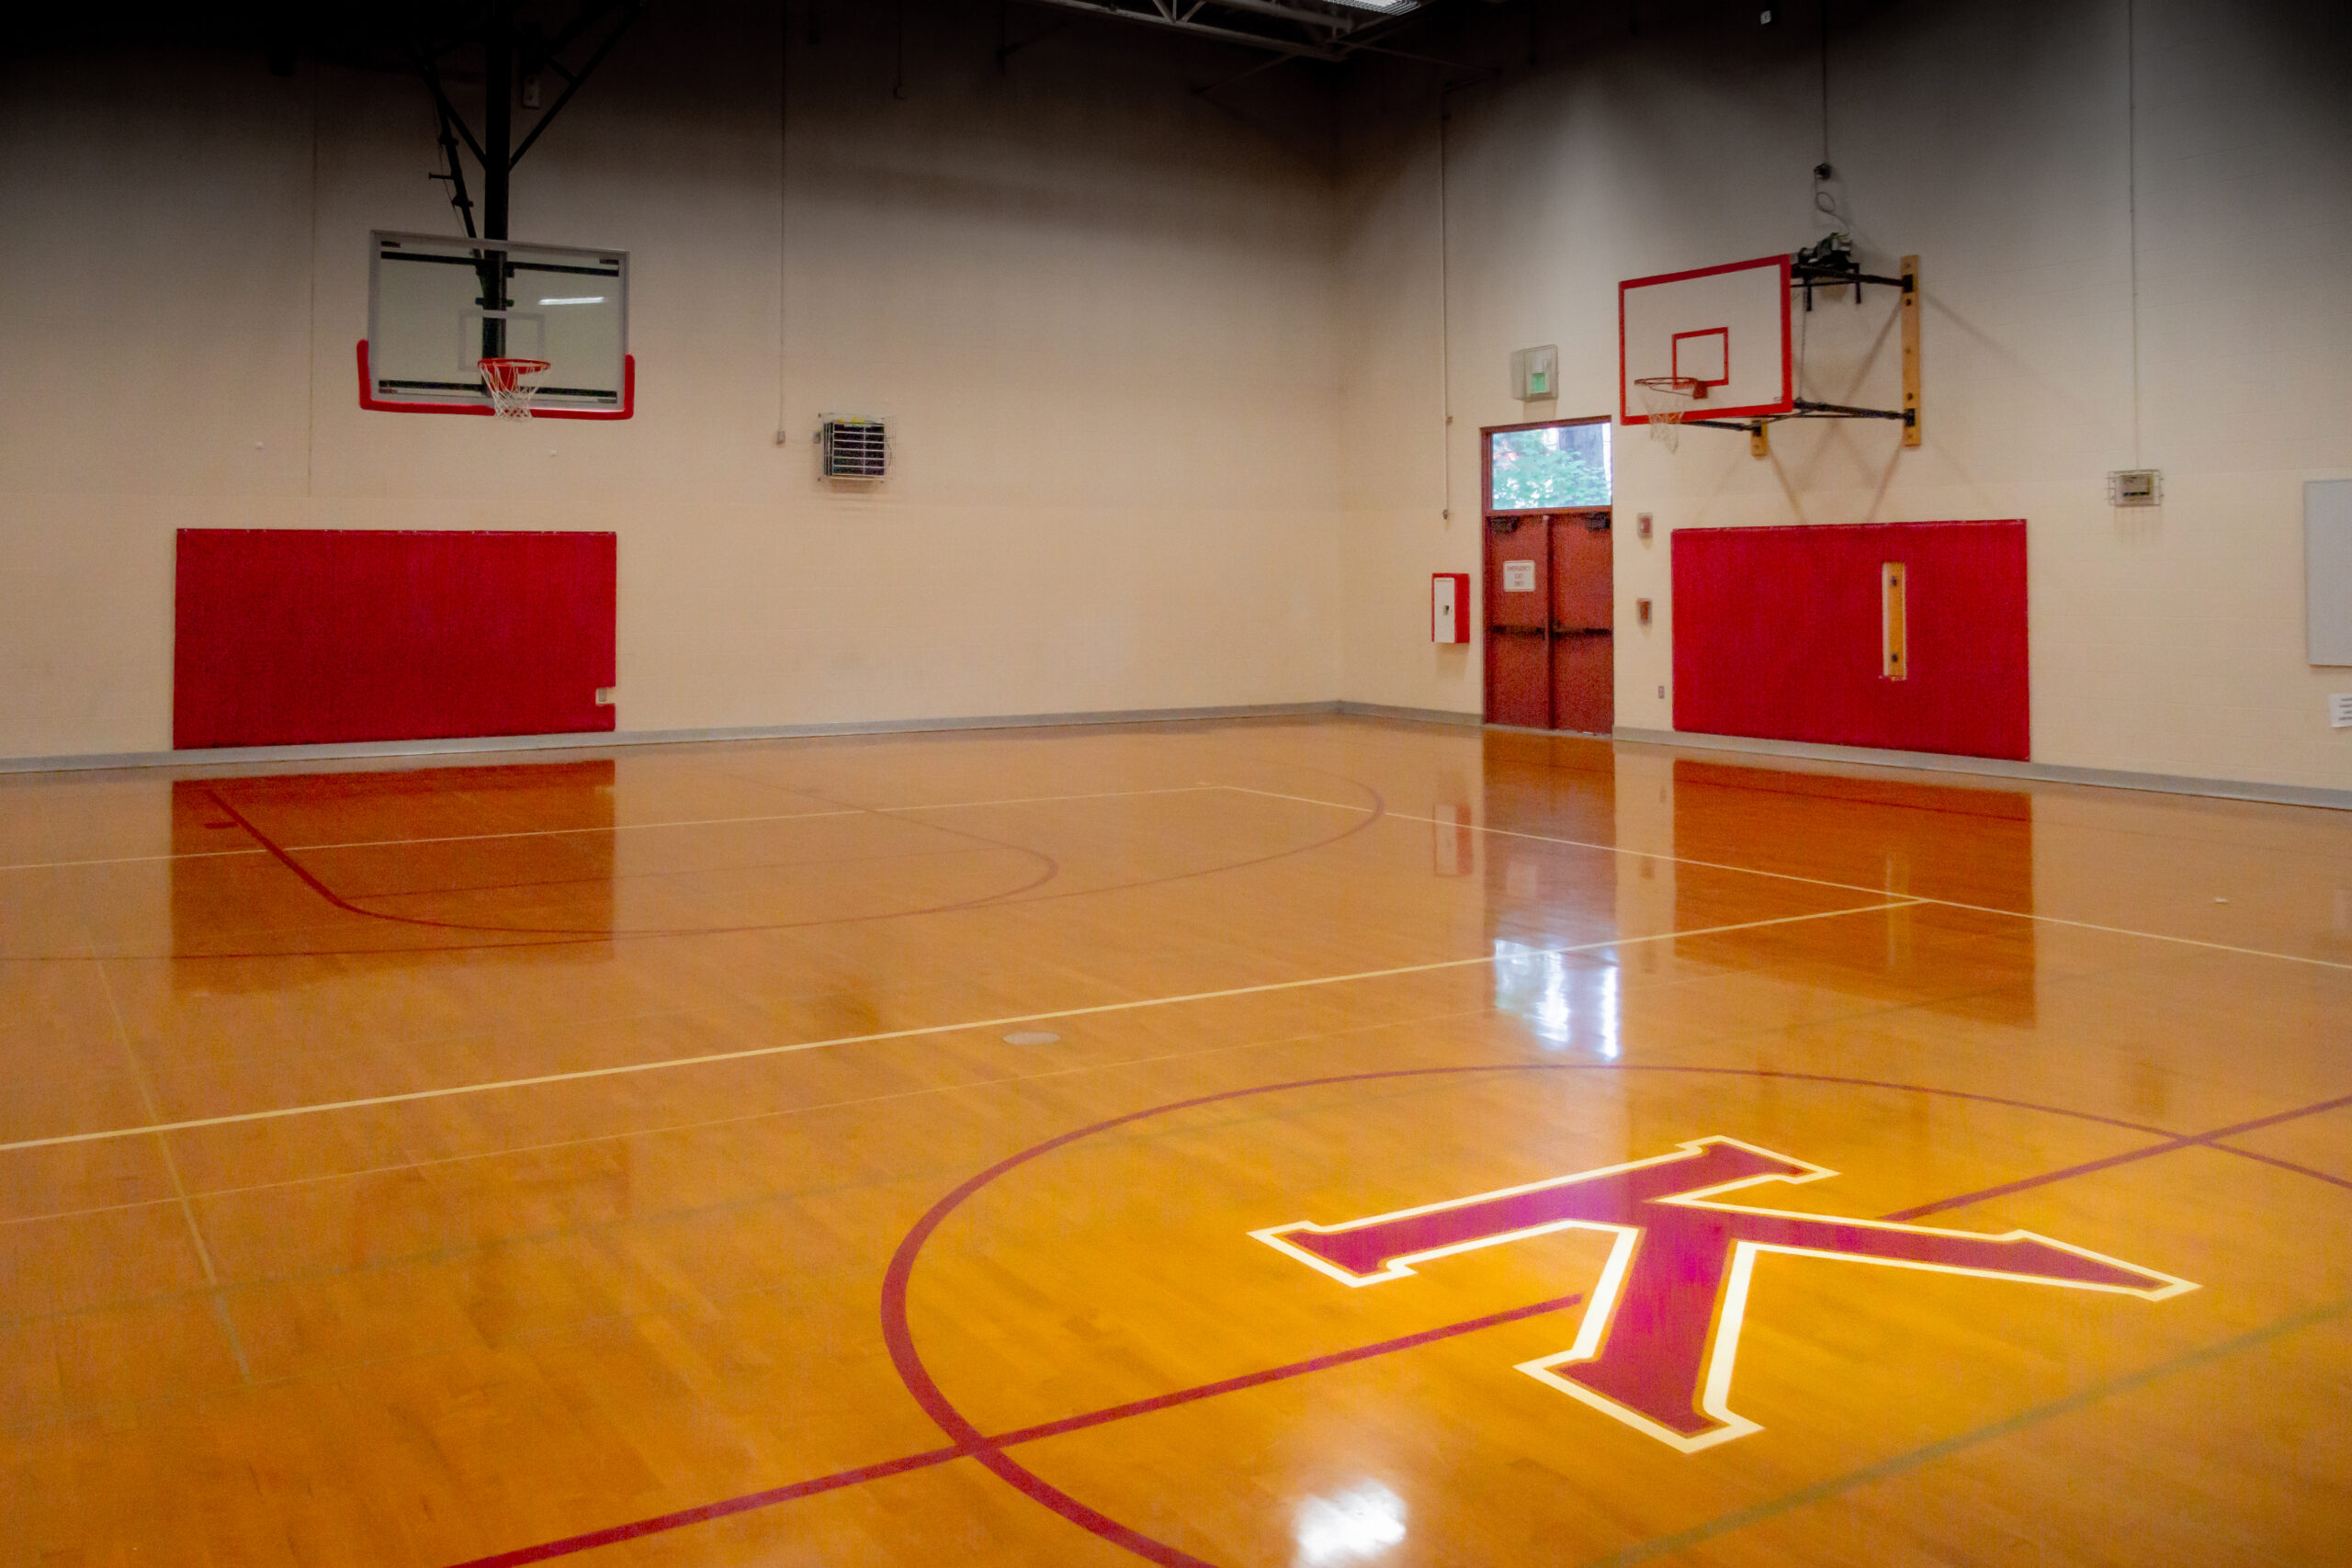 King’s Athletic Facilities